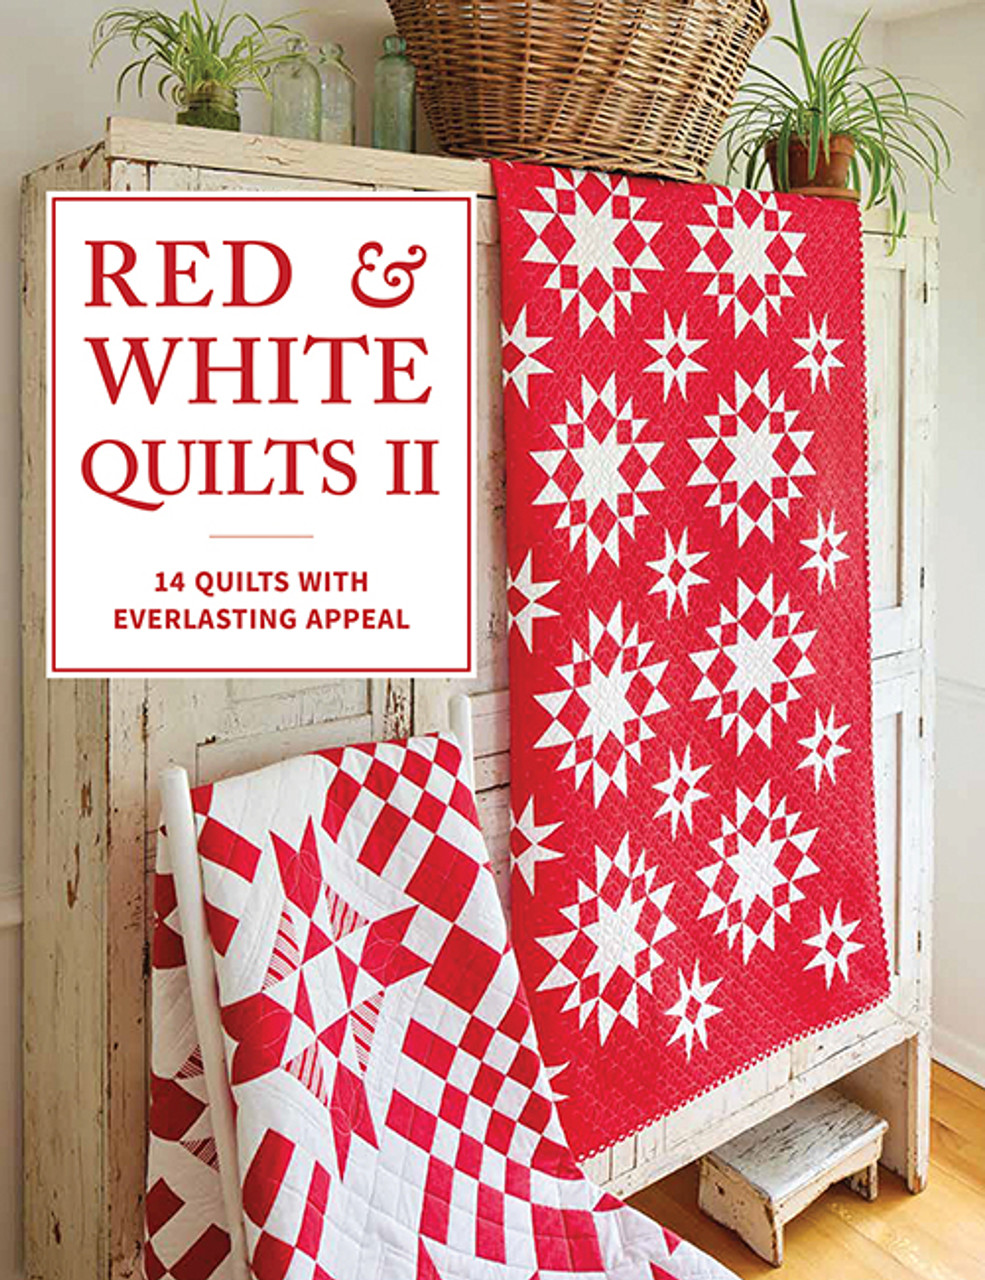  Classy American Quilt Design Wall- Design Wall-QuiltDesign Wall,-  Quilting